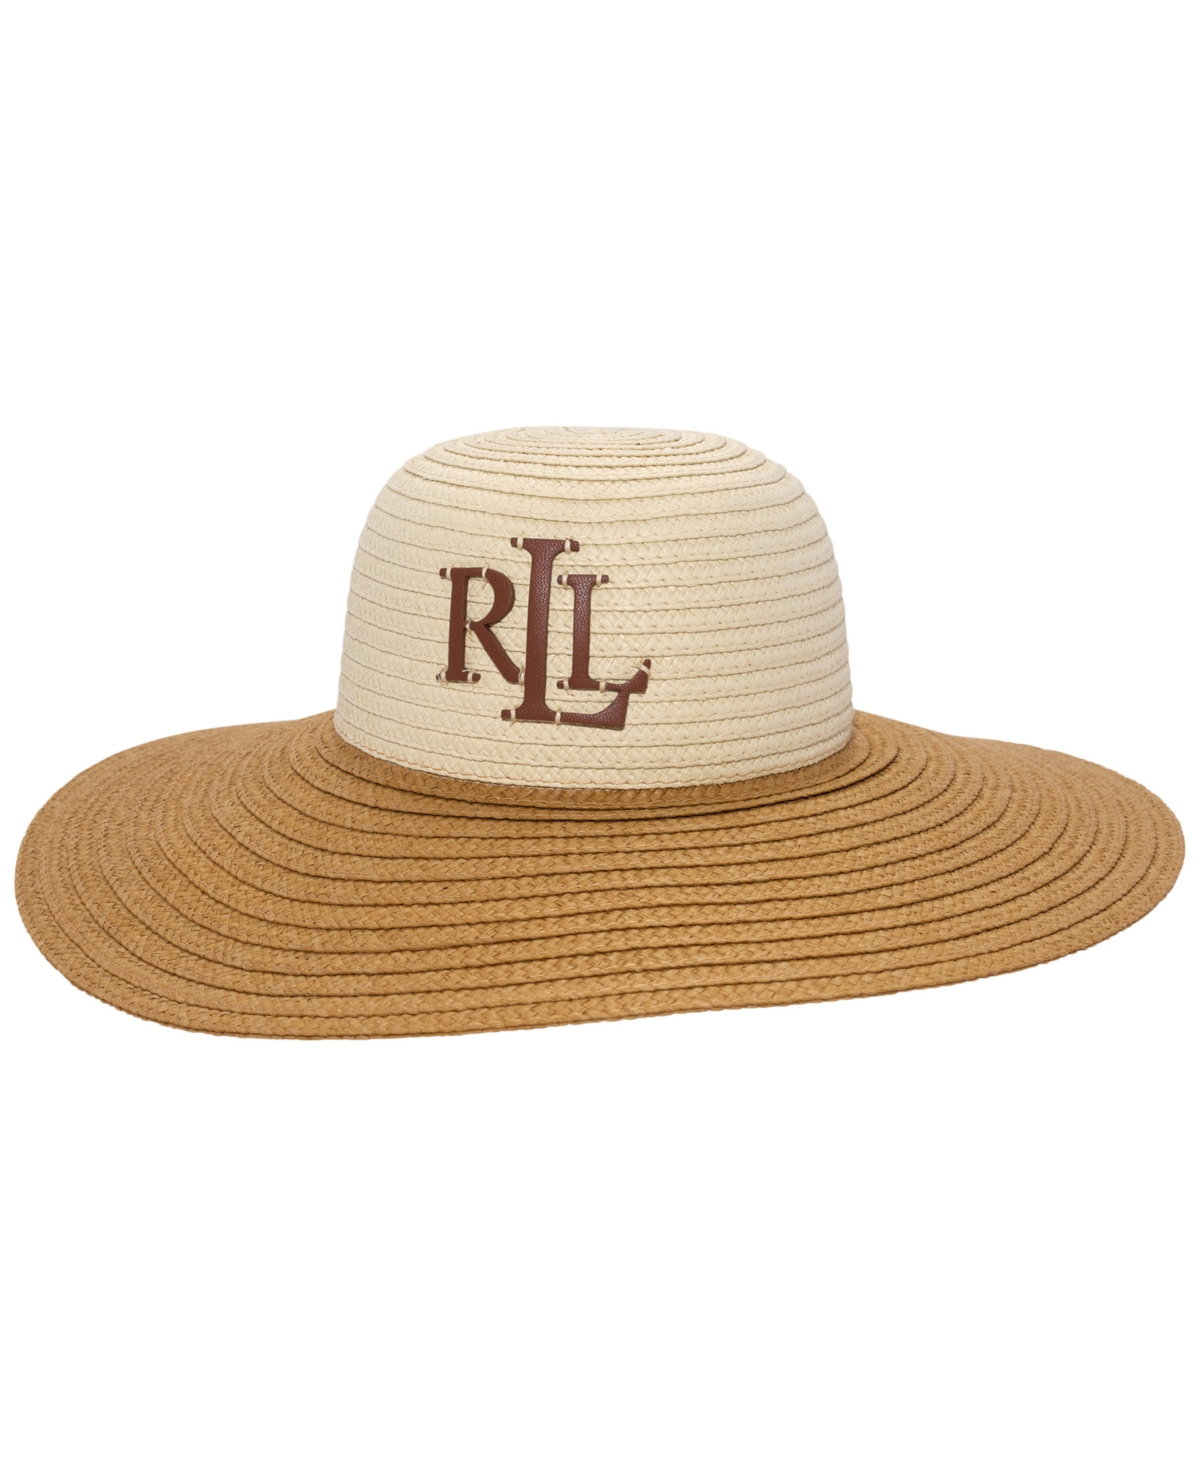 Leather Logo with Woven Sun Hat - Natural, Dark Natural